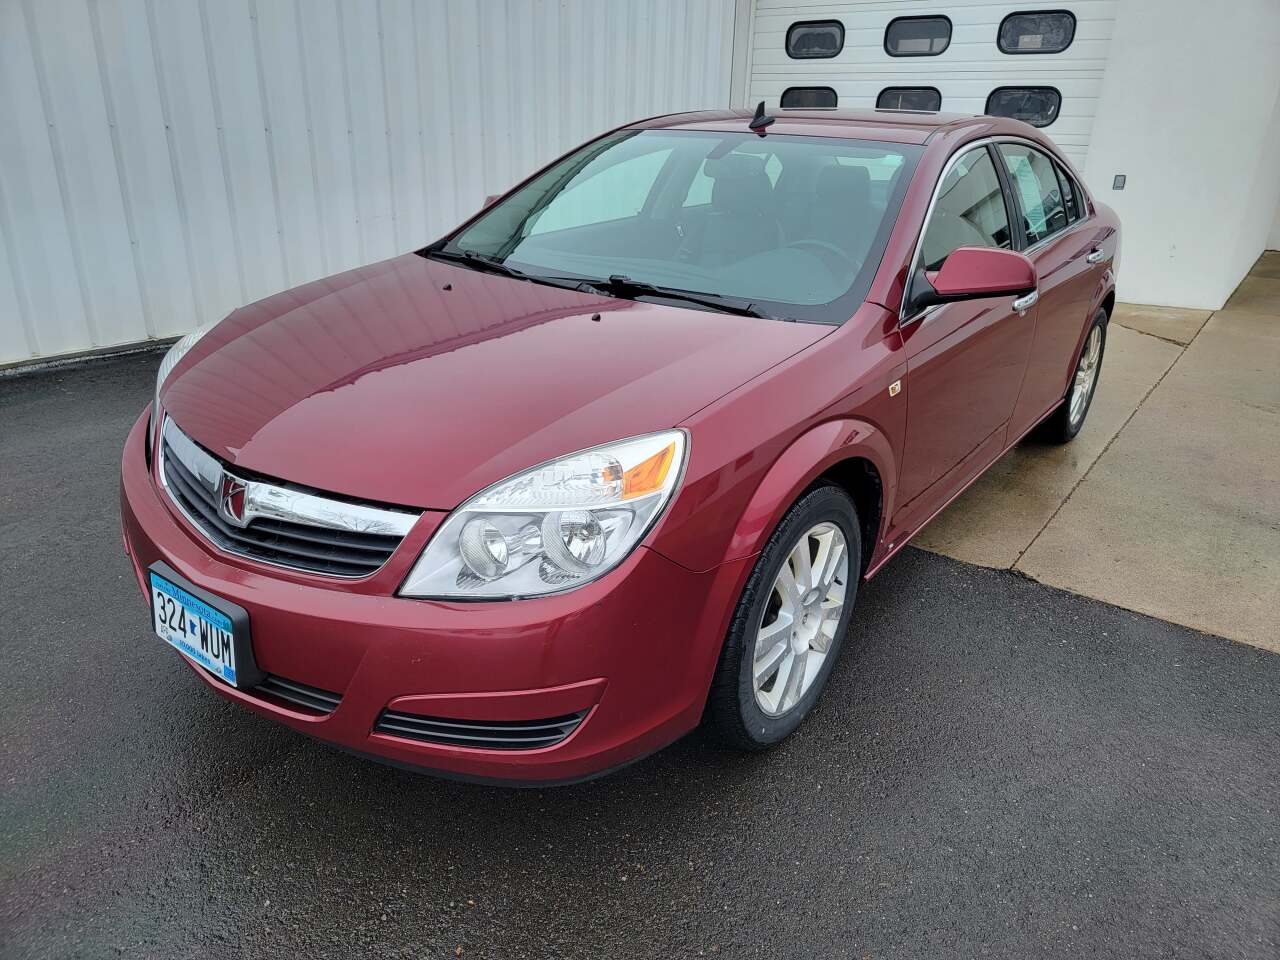 2009 Saturn Aura For Sale In Wooster, OH - Carsforsale.com®